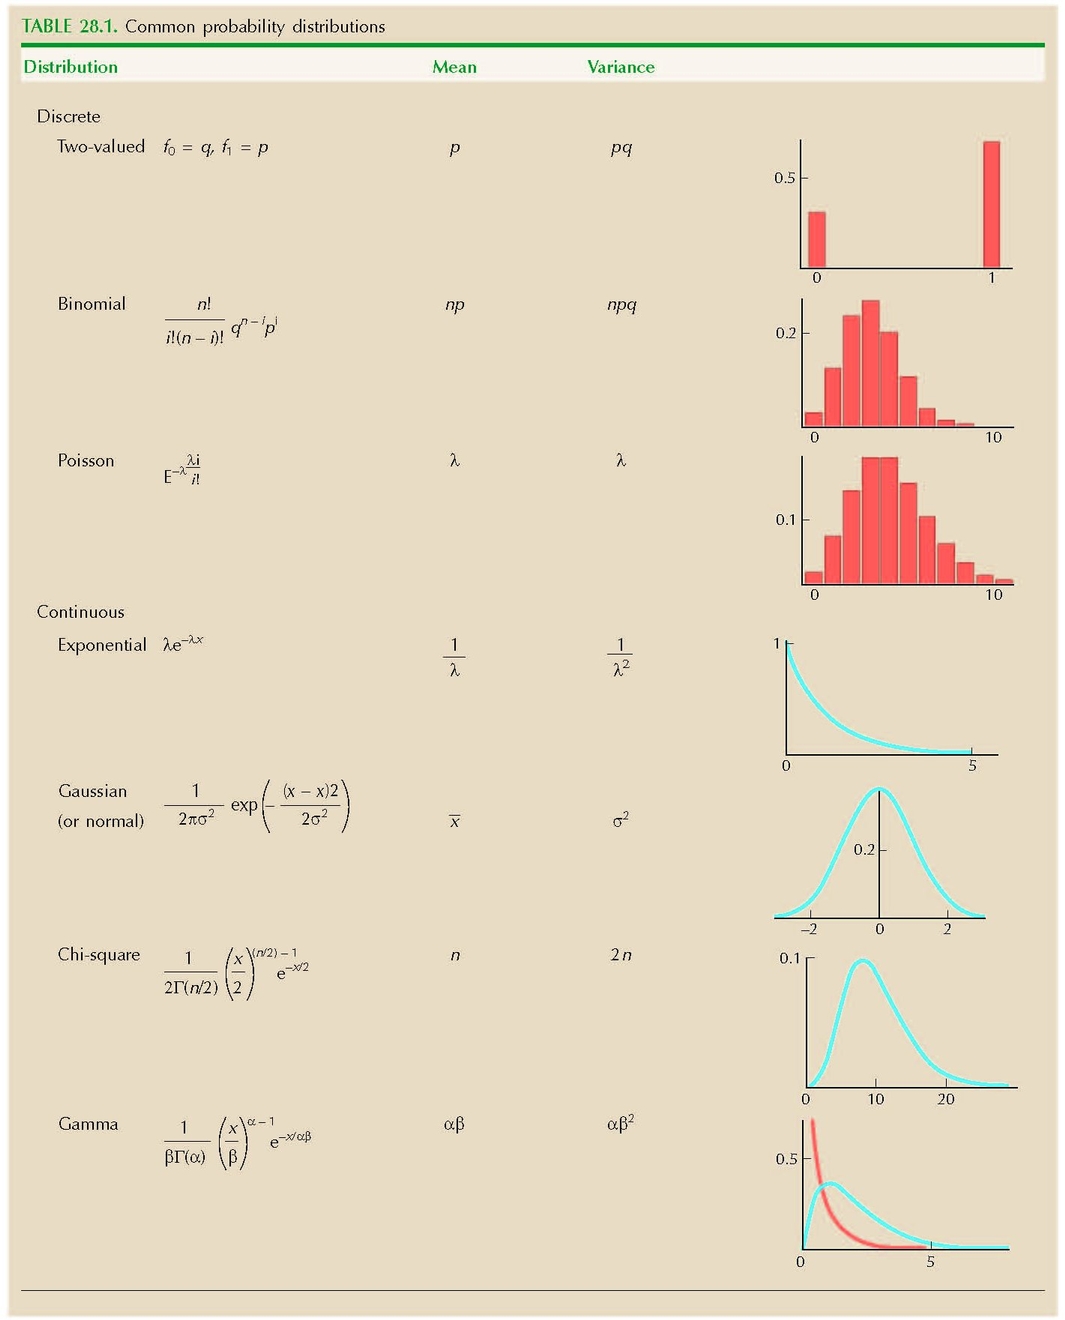 TABLE 28.1. Common probability distributions